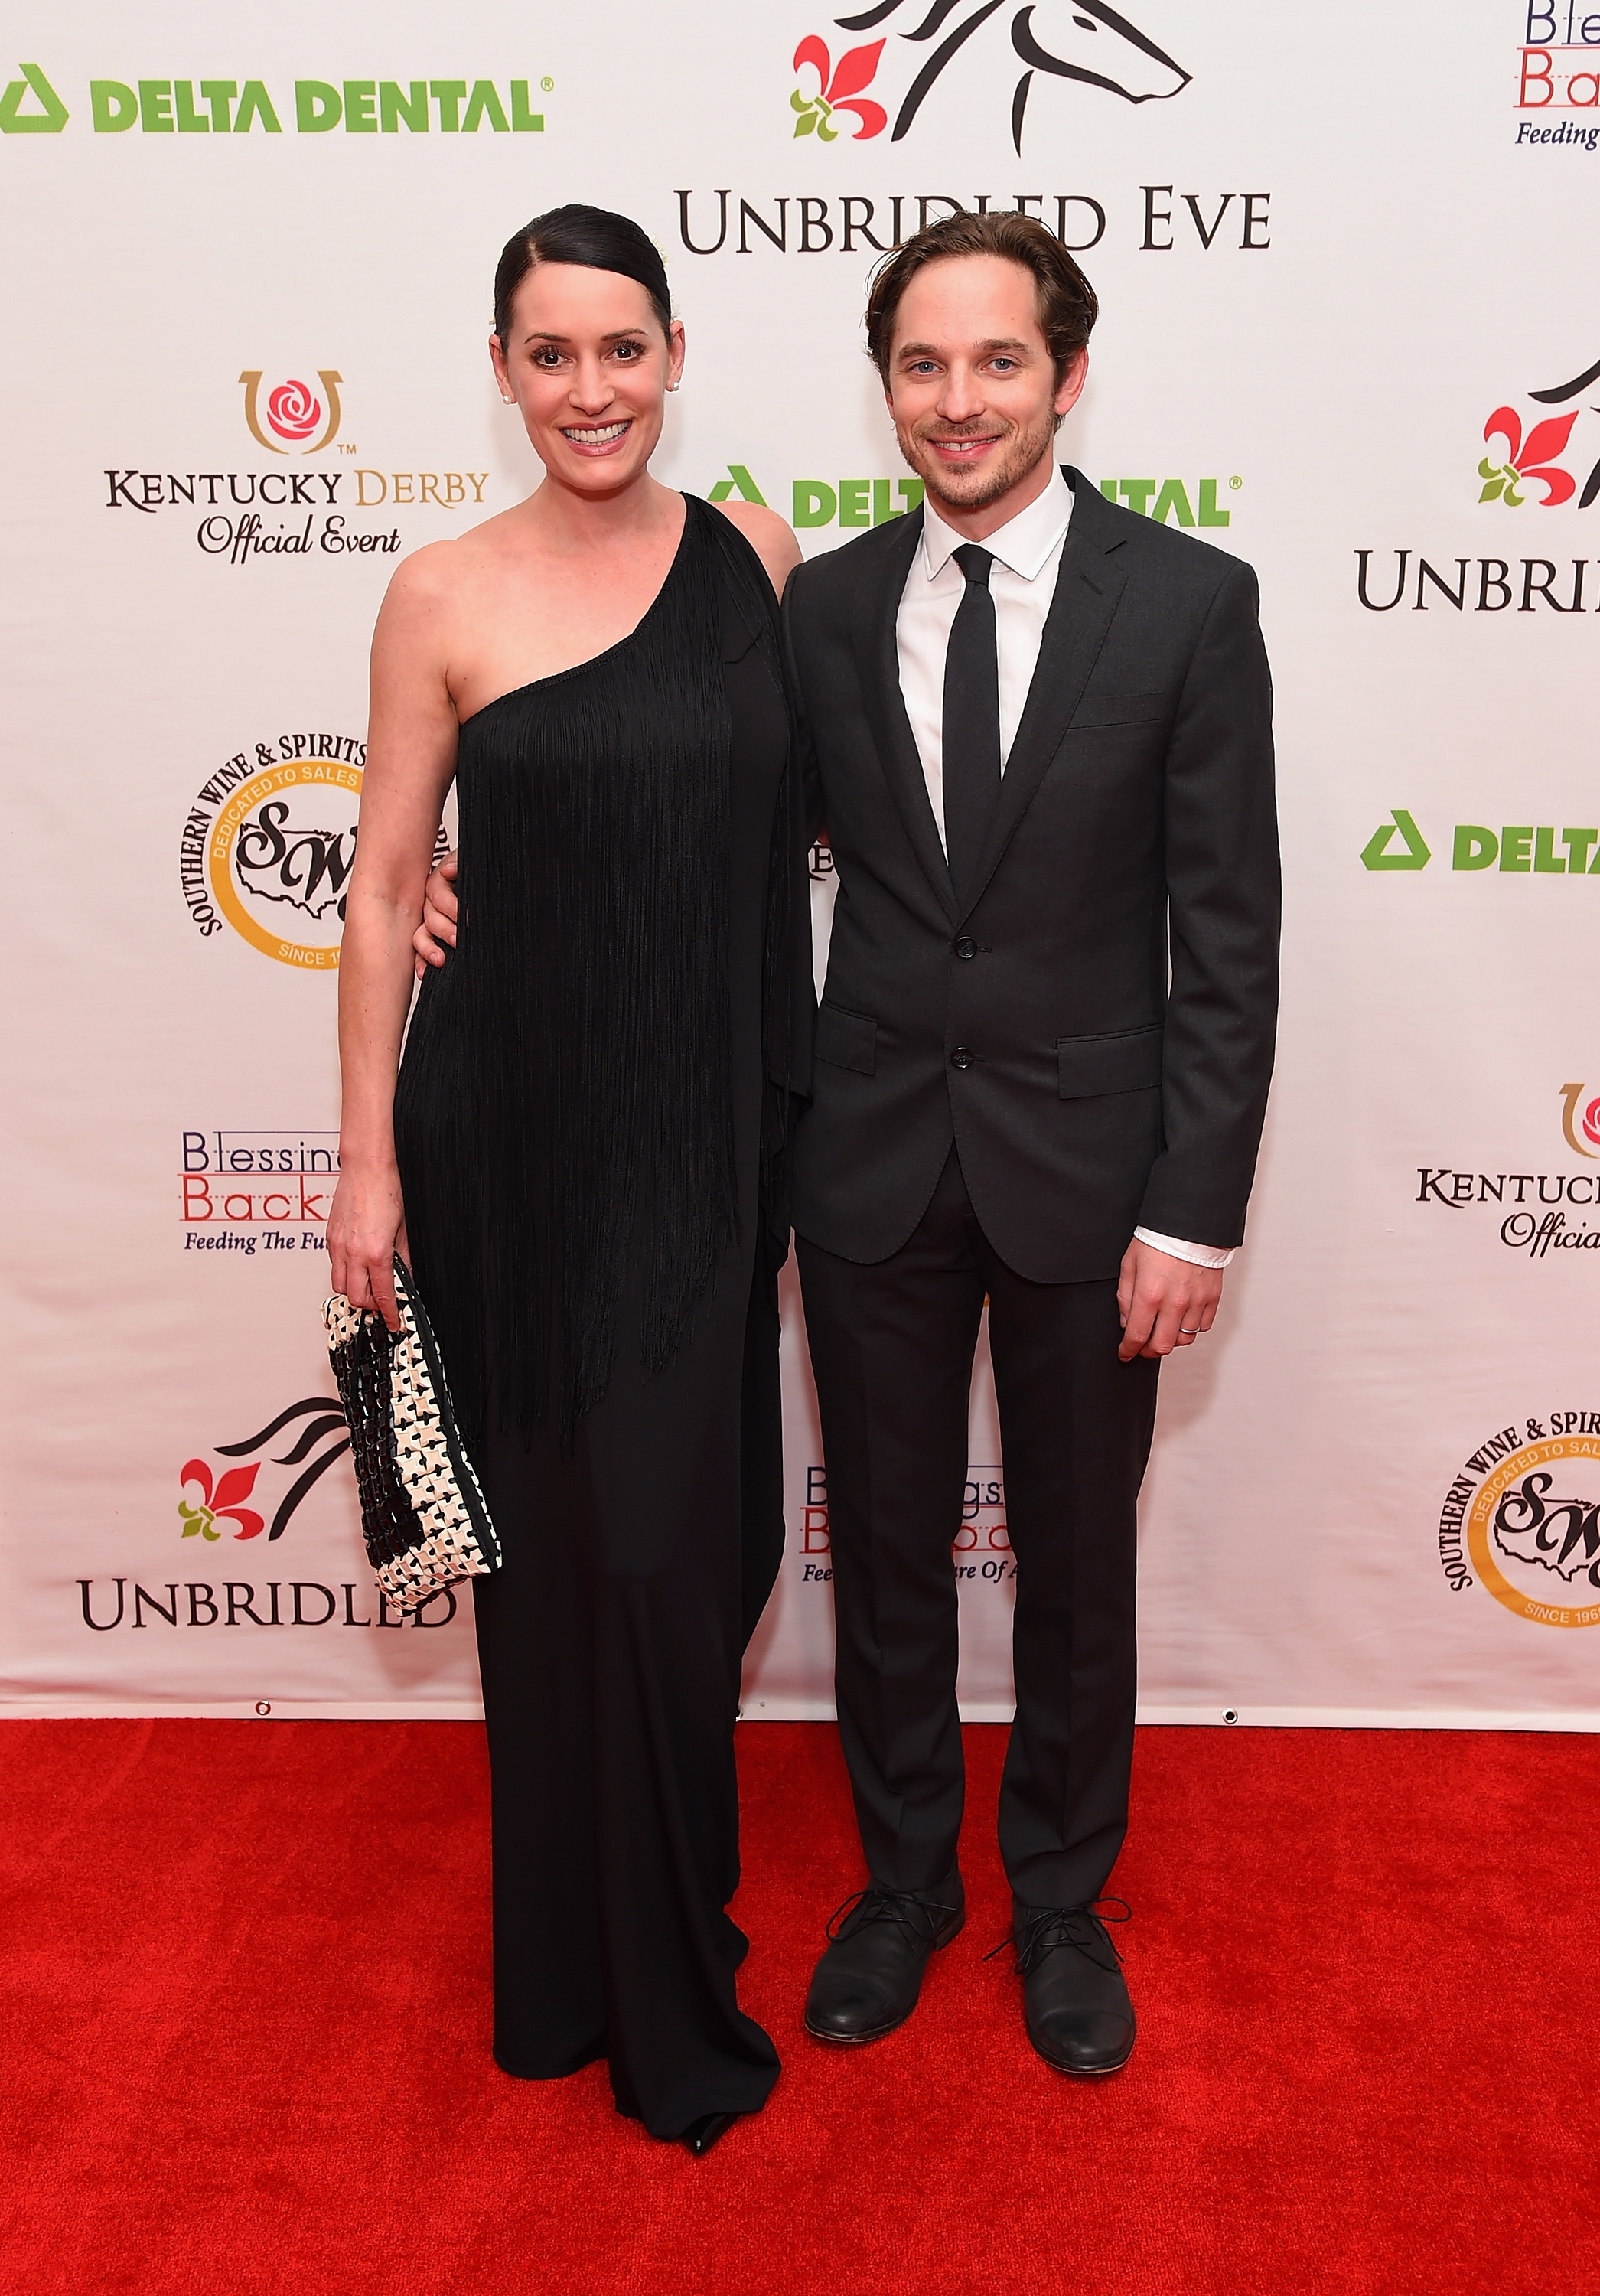 Paget Brewster and Steve Damstra at the 141st Kentucky Derby Unbridled Eve Gala on May 1, 2015, in Louisville, Kentucky. | Source: Getty Images